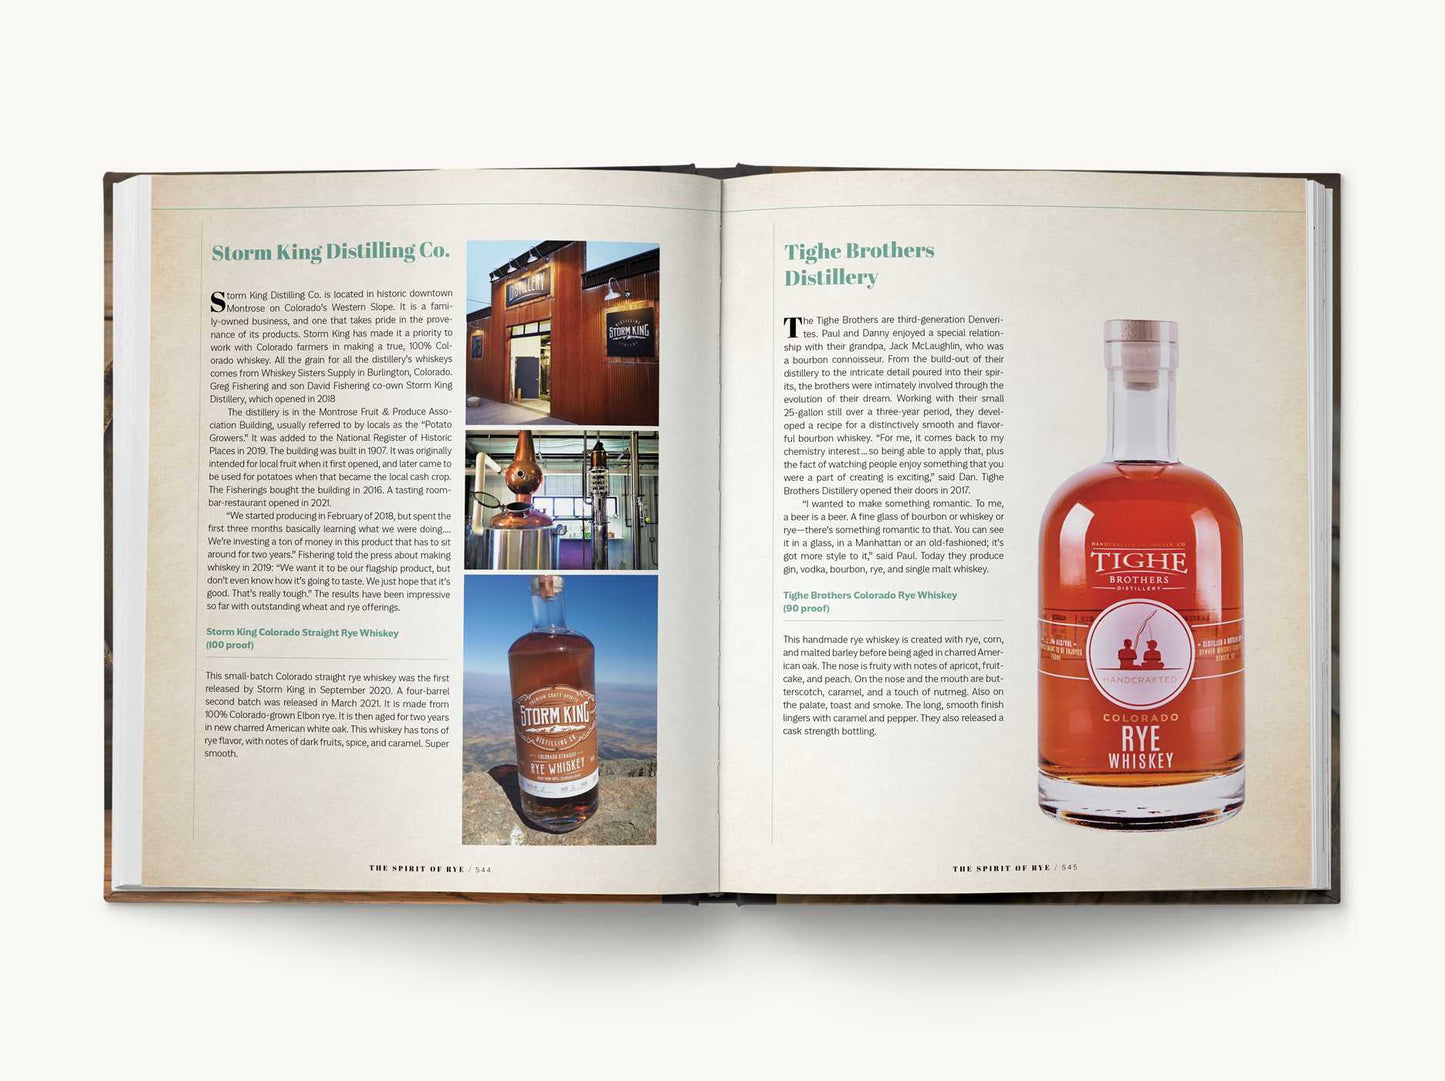 The Spirit of Rye: Over 300 Expressions to Celebrate the Rye Revival